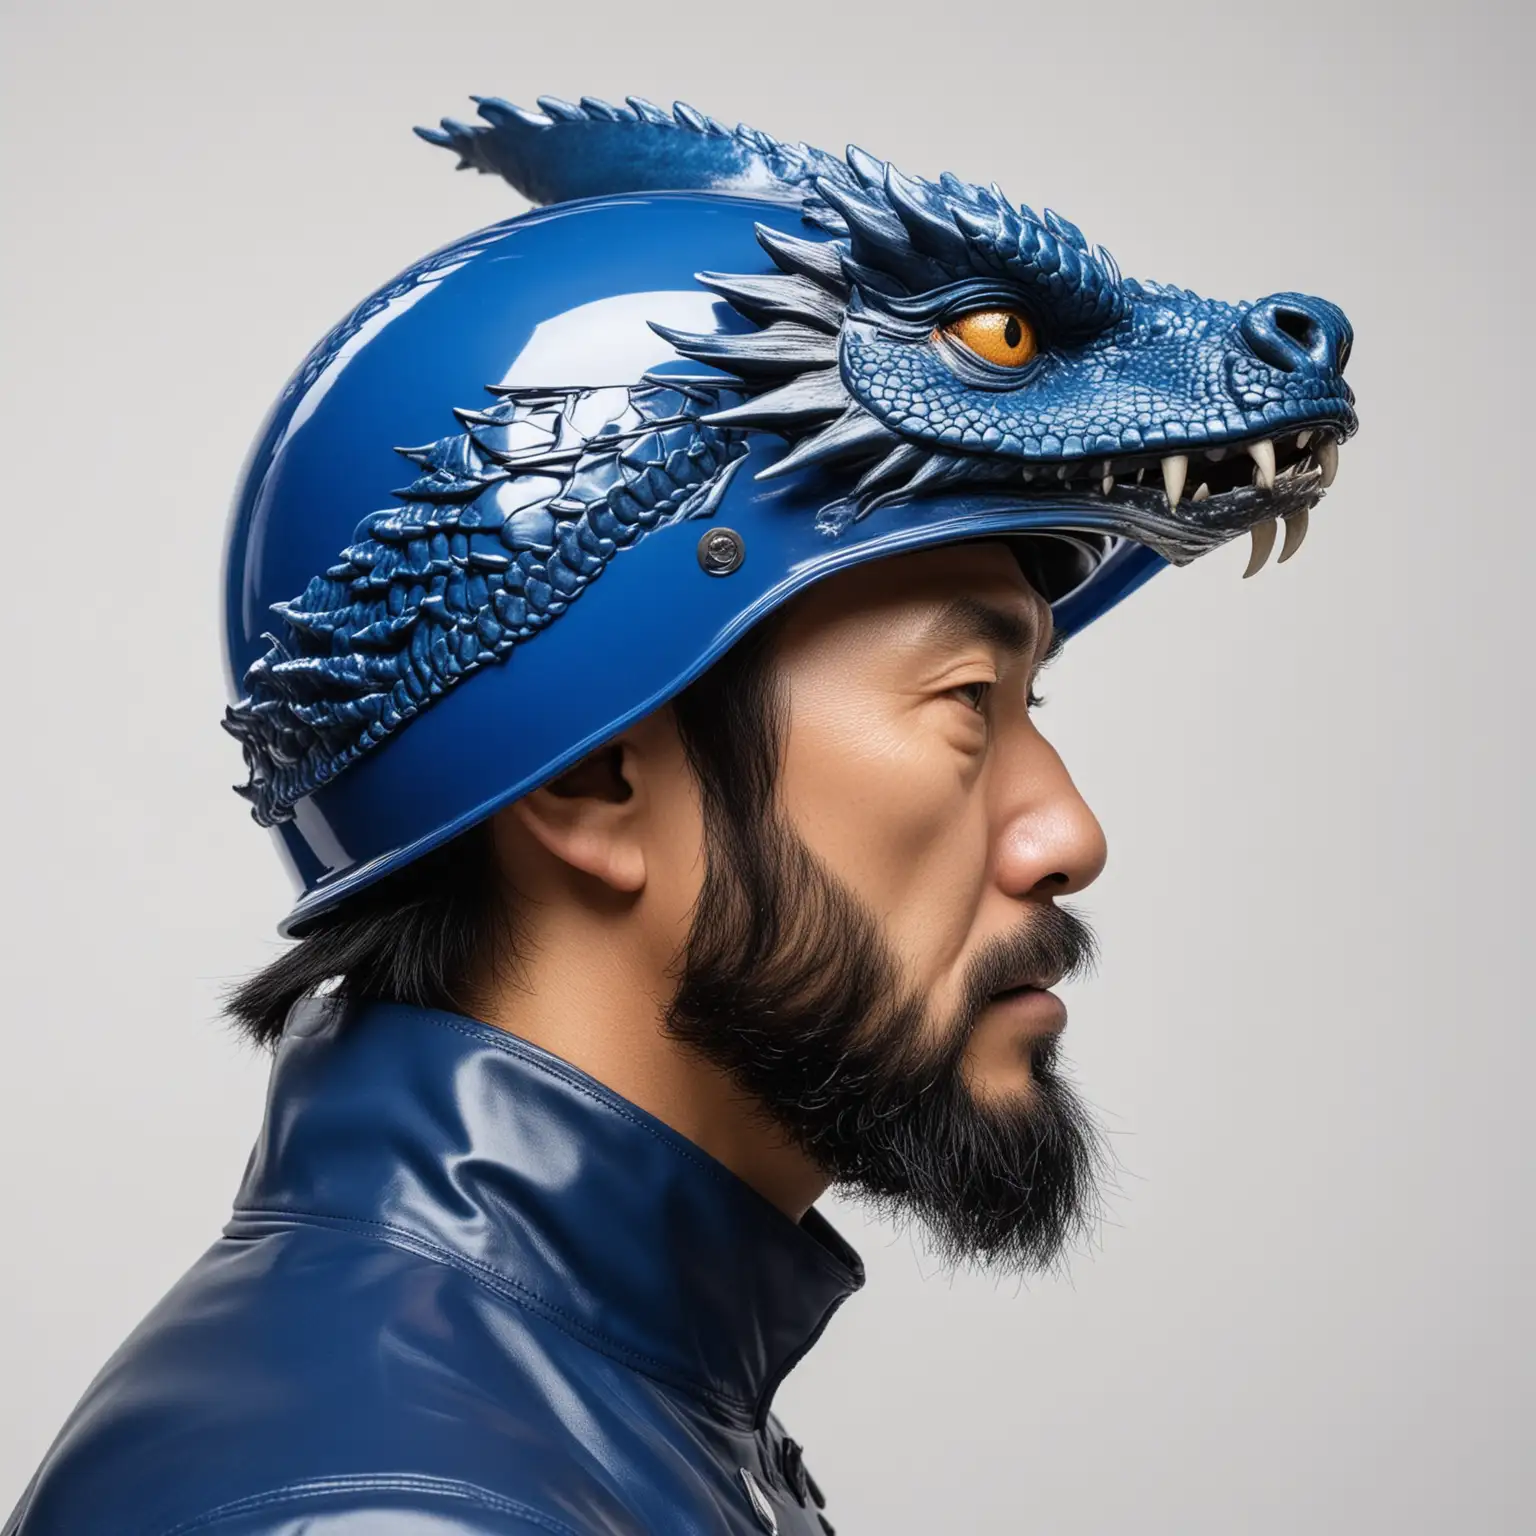 Strong Angry MiddleAged Japanese Man with Dragon Helmet in Side Profile Portrait